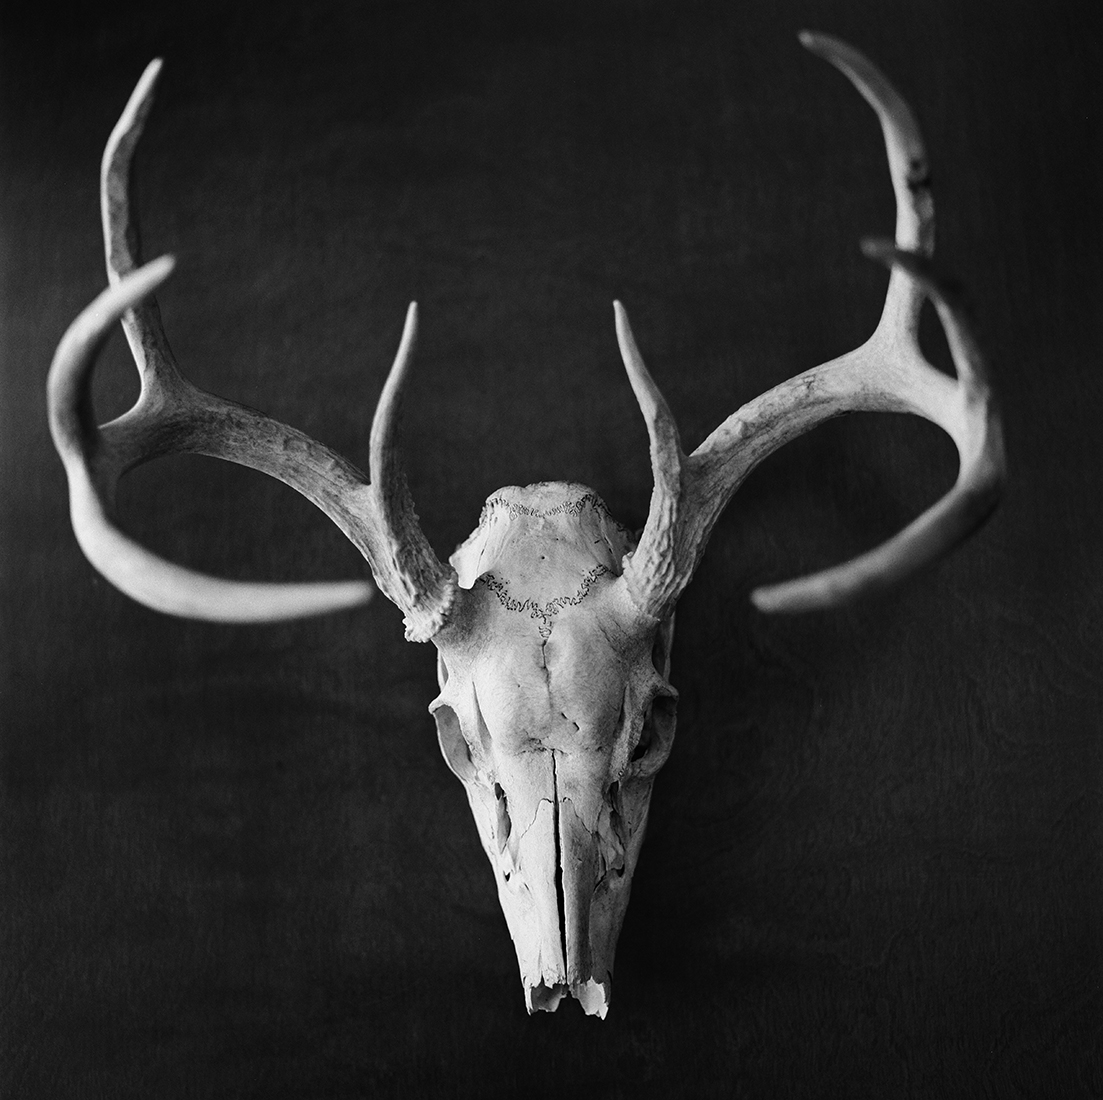 Stark white deer skull and antlers: the tiny black zigzagging lines on the forehead are sutures where bones meet.